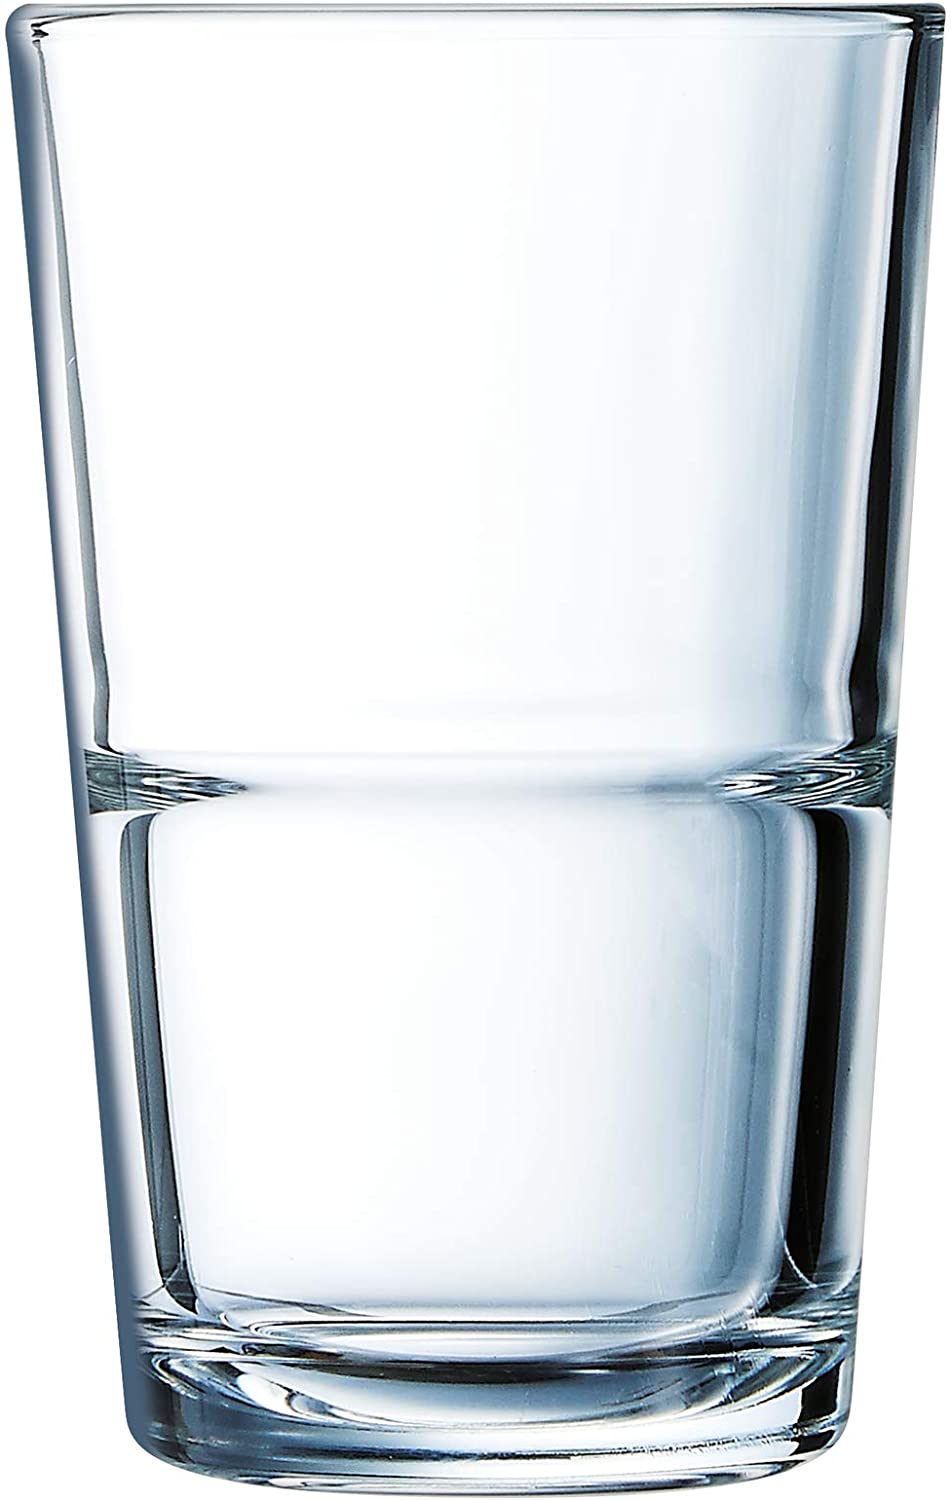 No Measure Mark Arcoroc Hiball Glasses Stacking Stack Up Water Glasses, Juice Glasses, 350ml, Set of 6 Glasses